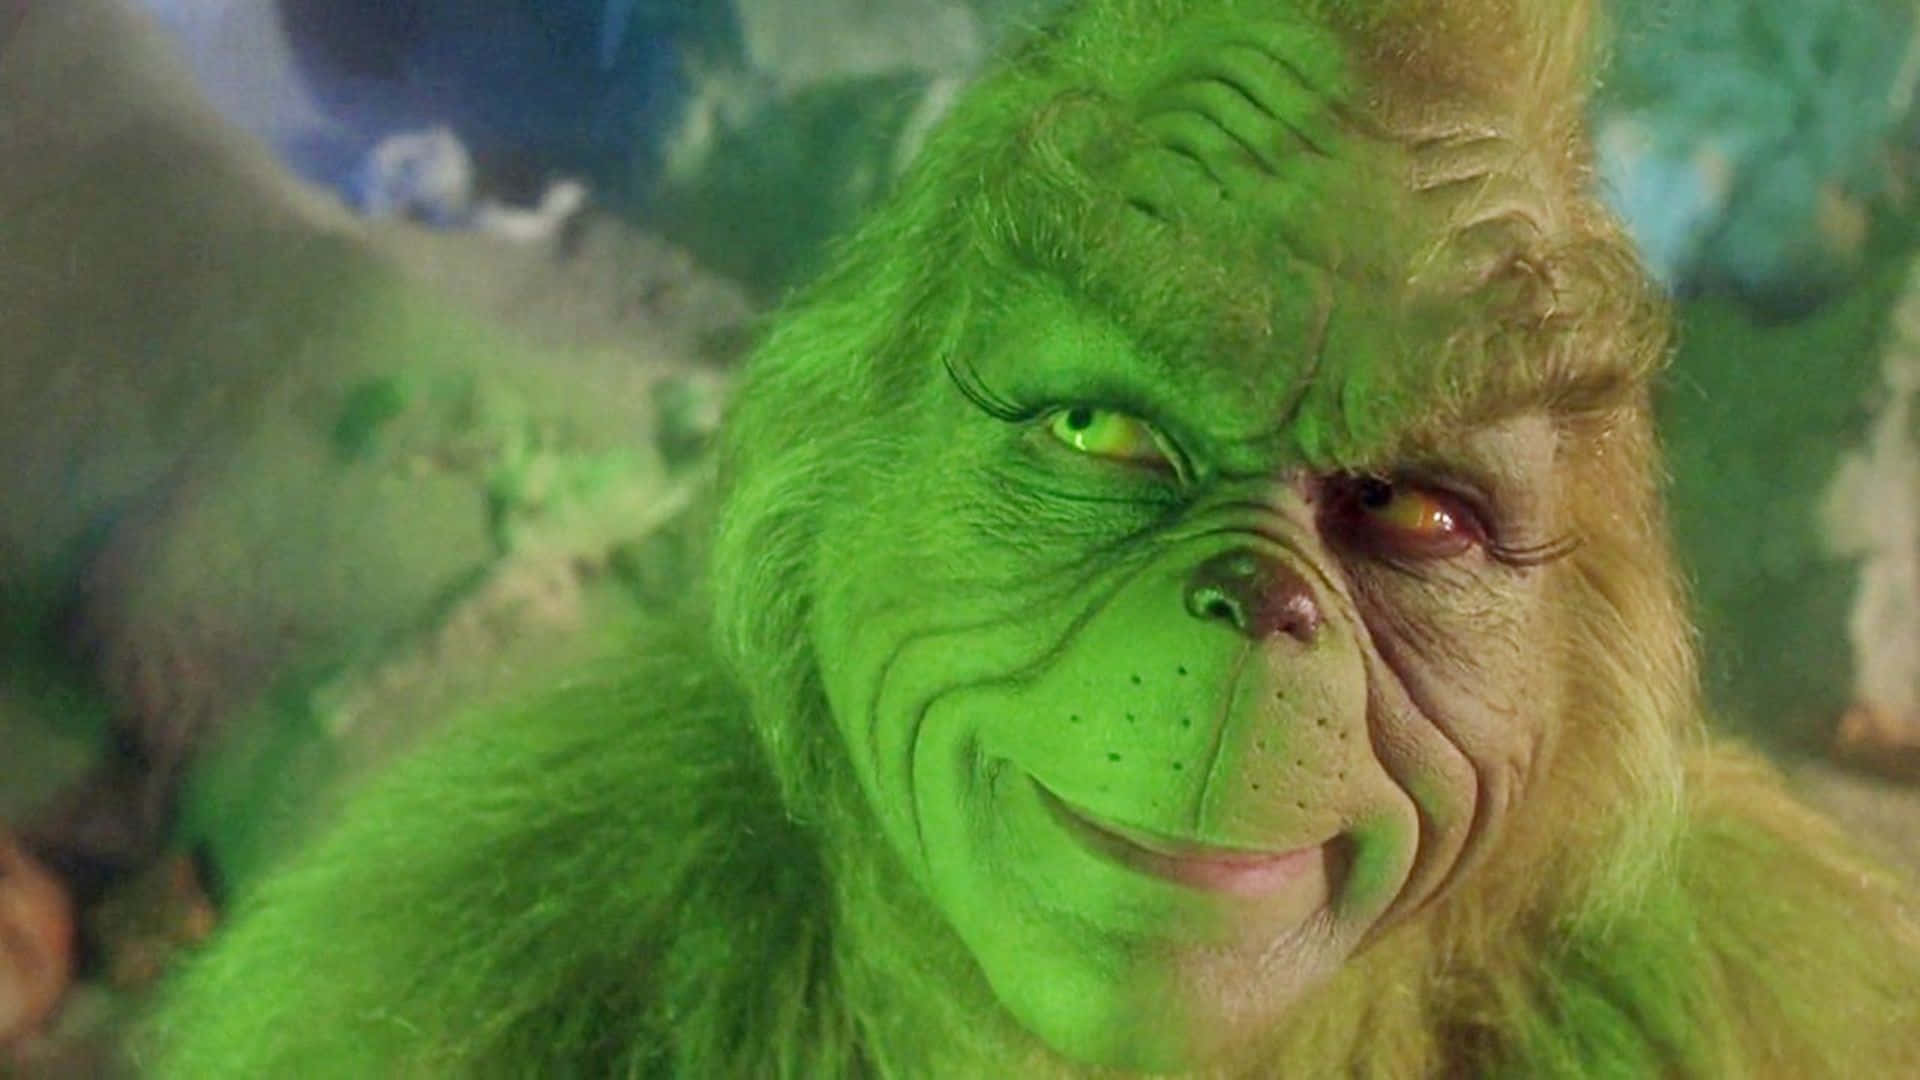 The Grinch In The Movie